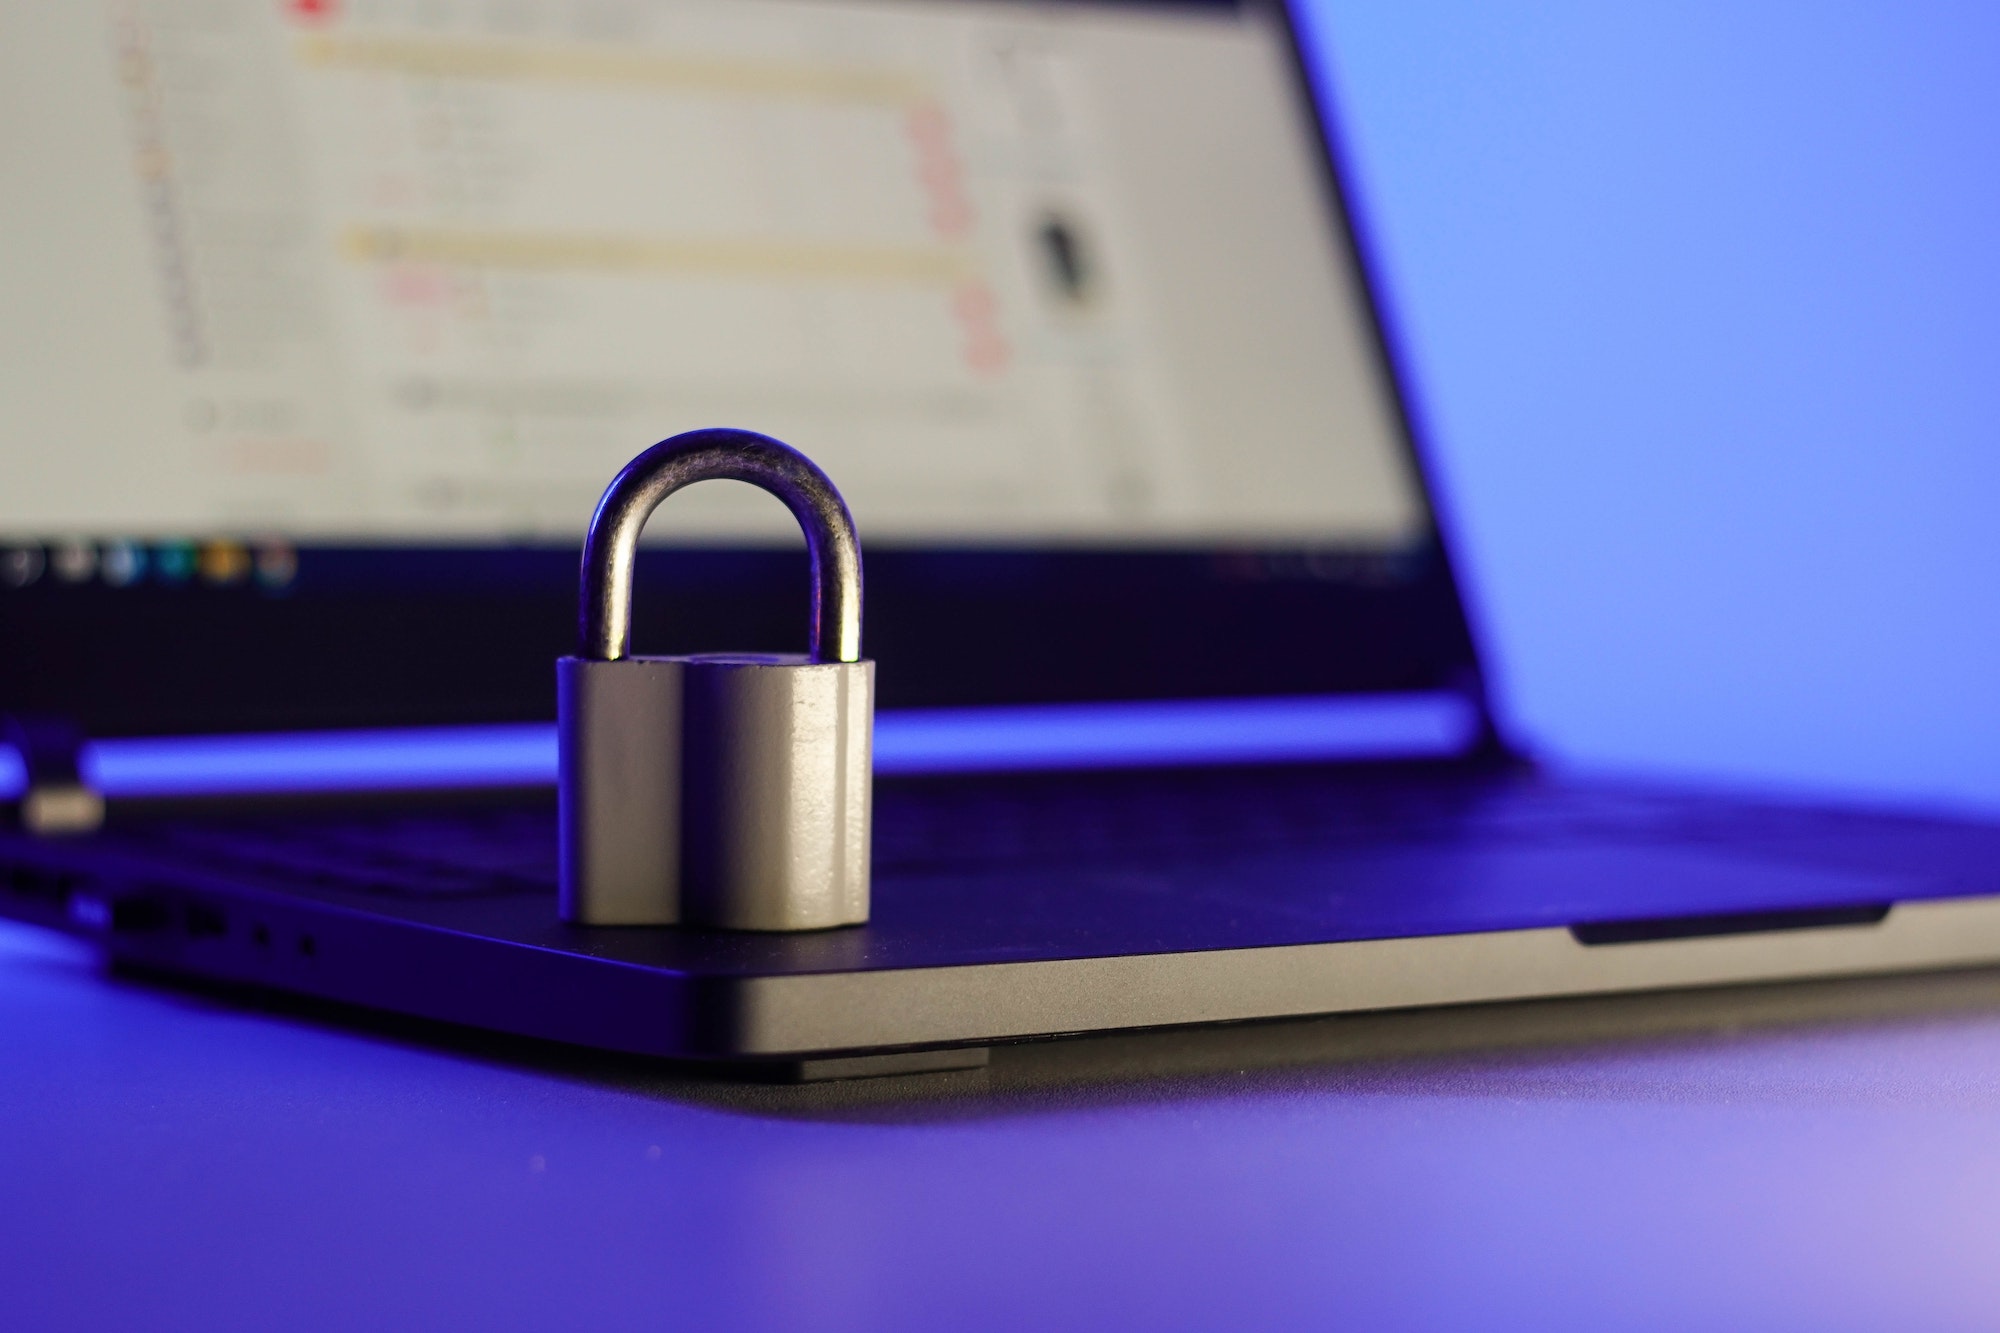 locked-metal-padlock-on-a-laptop-keyboard-over-blue-background-cyber-security-concept-.jpg